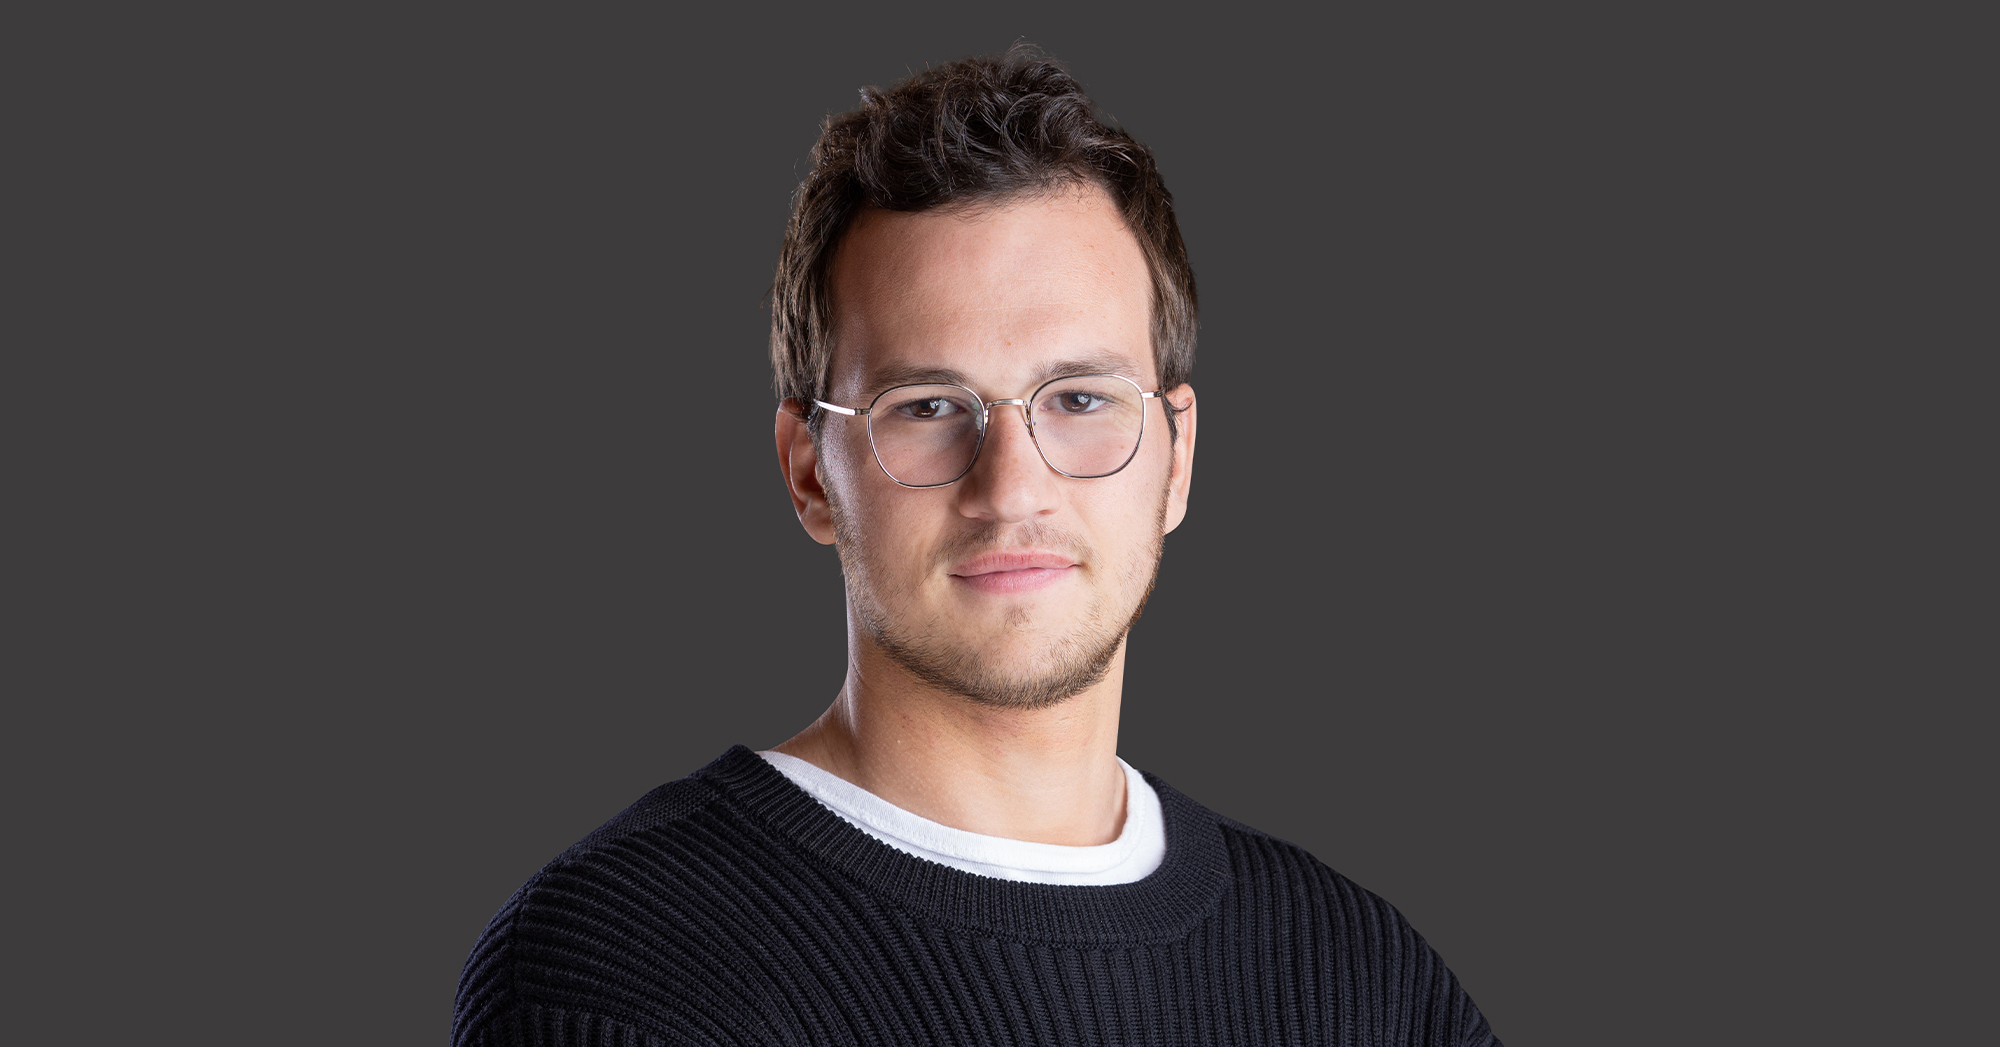 Image of Henrique Dubugras, Founder and Co-CEO at Brex